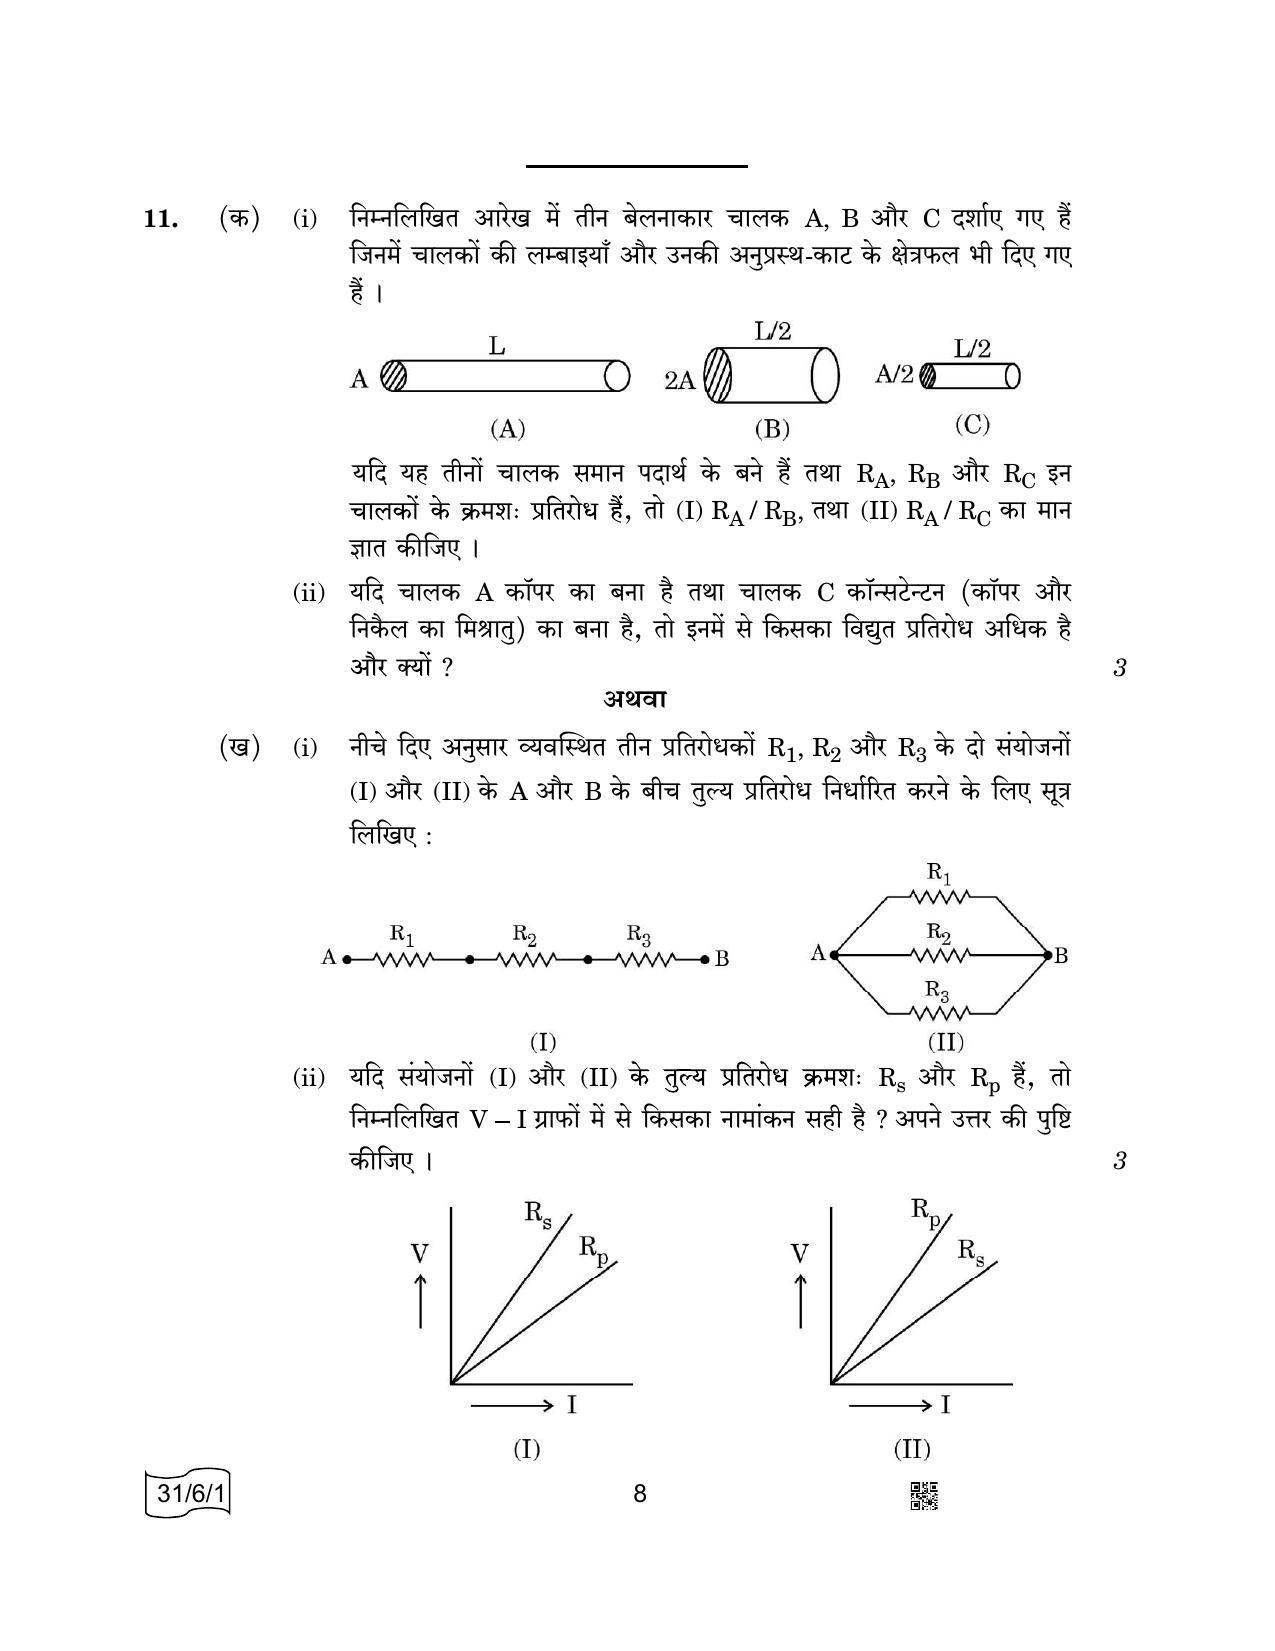 CBSE Class 10 31-6-1 SCIENCE 2022 Compartment Question Paper - Page 8